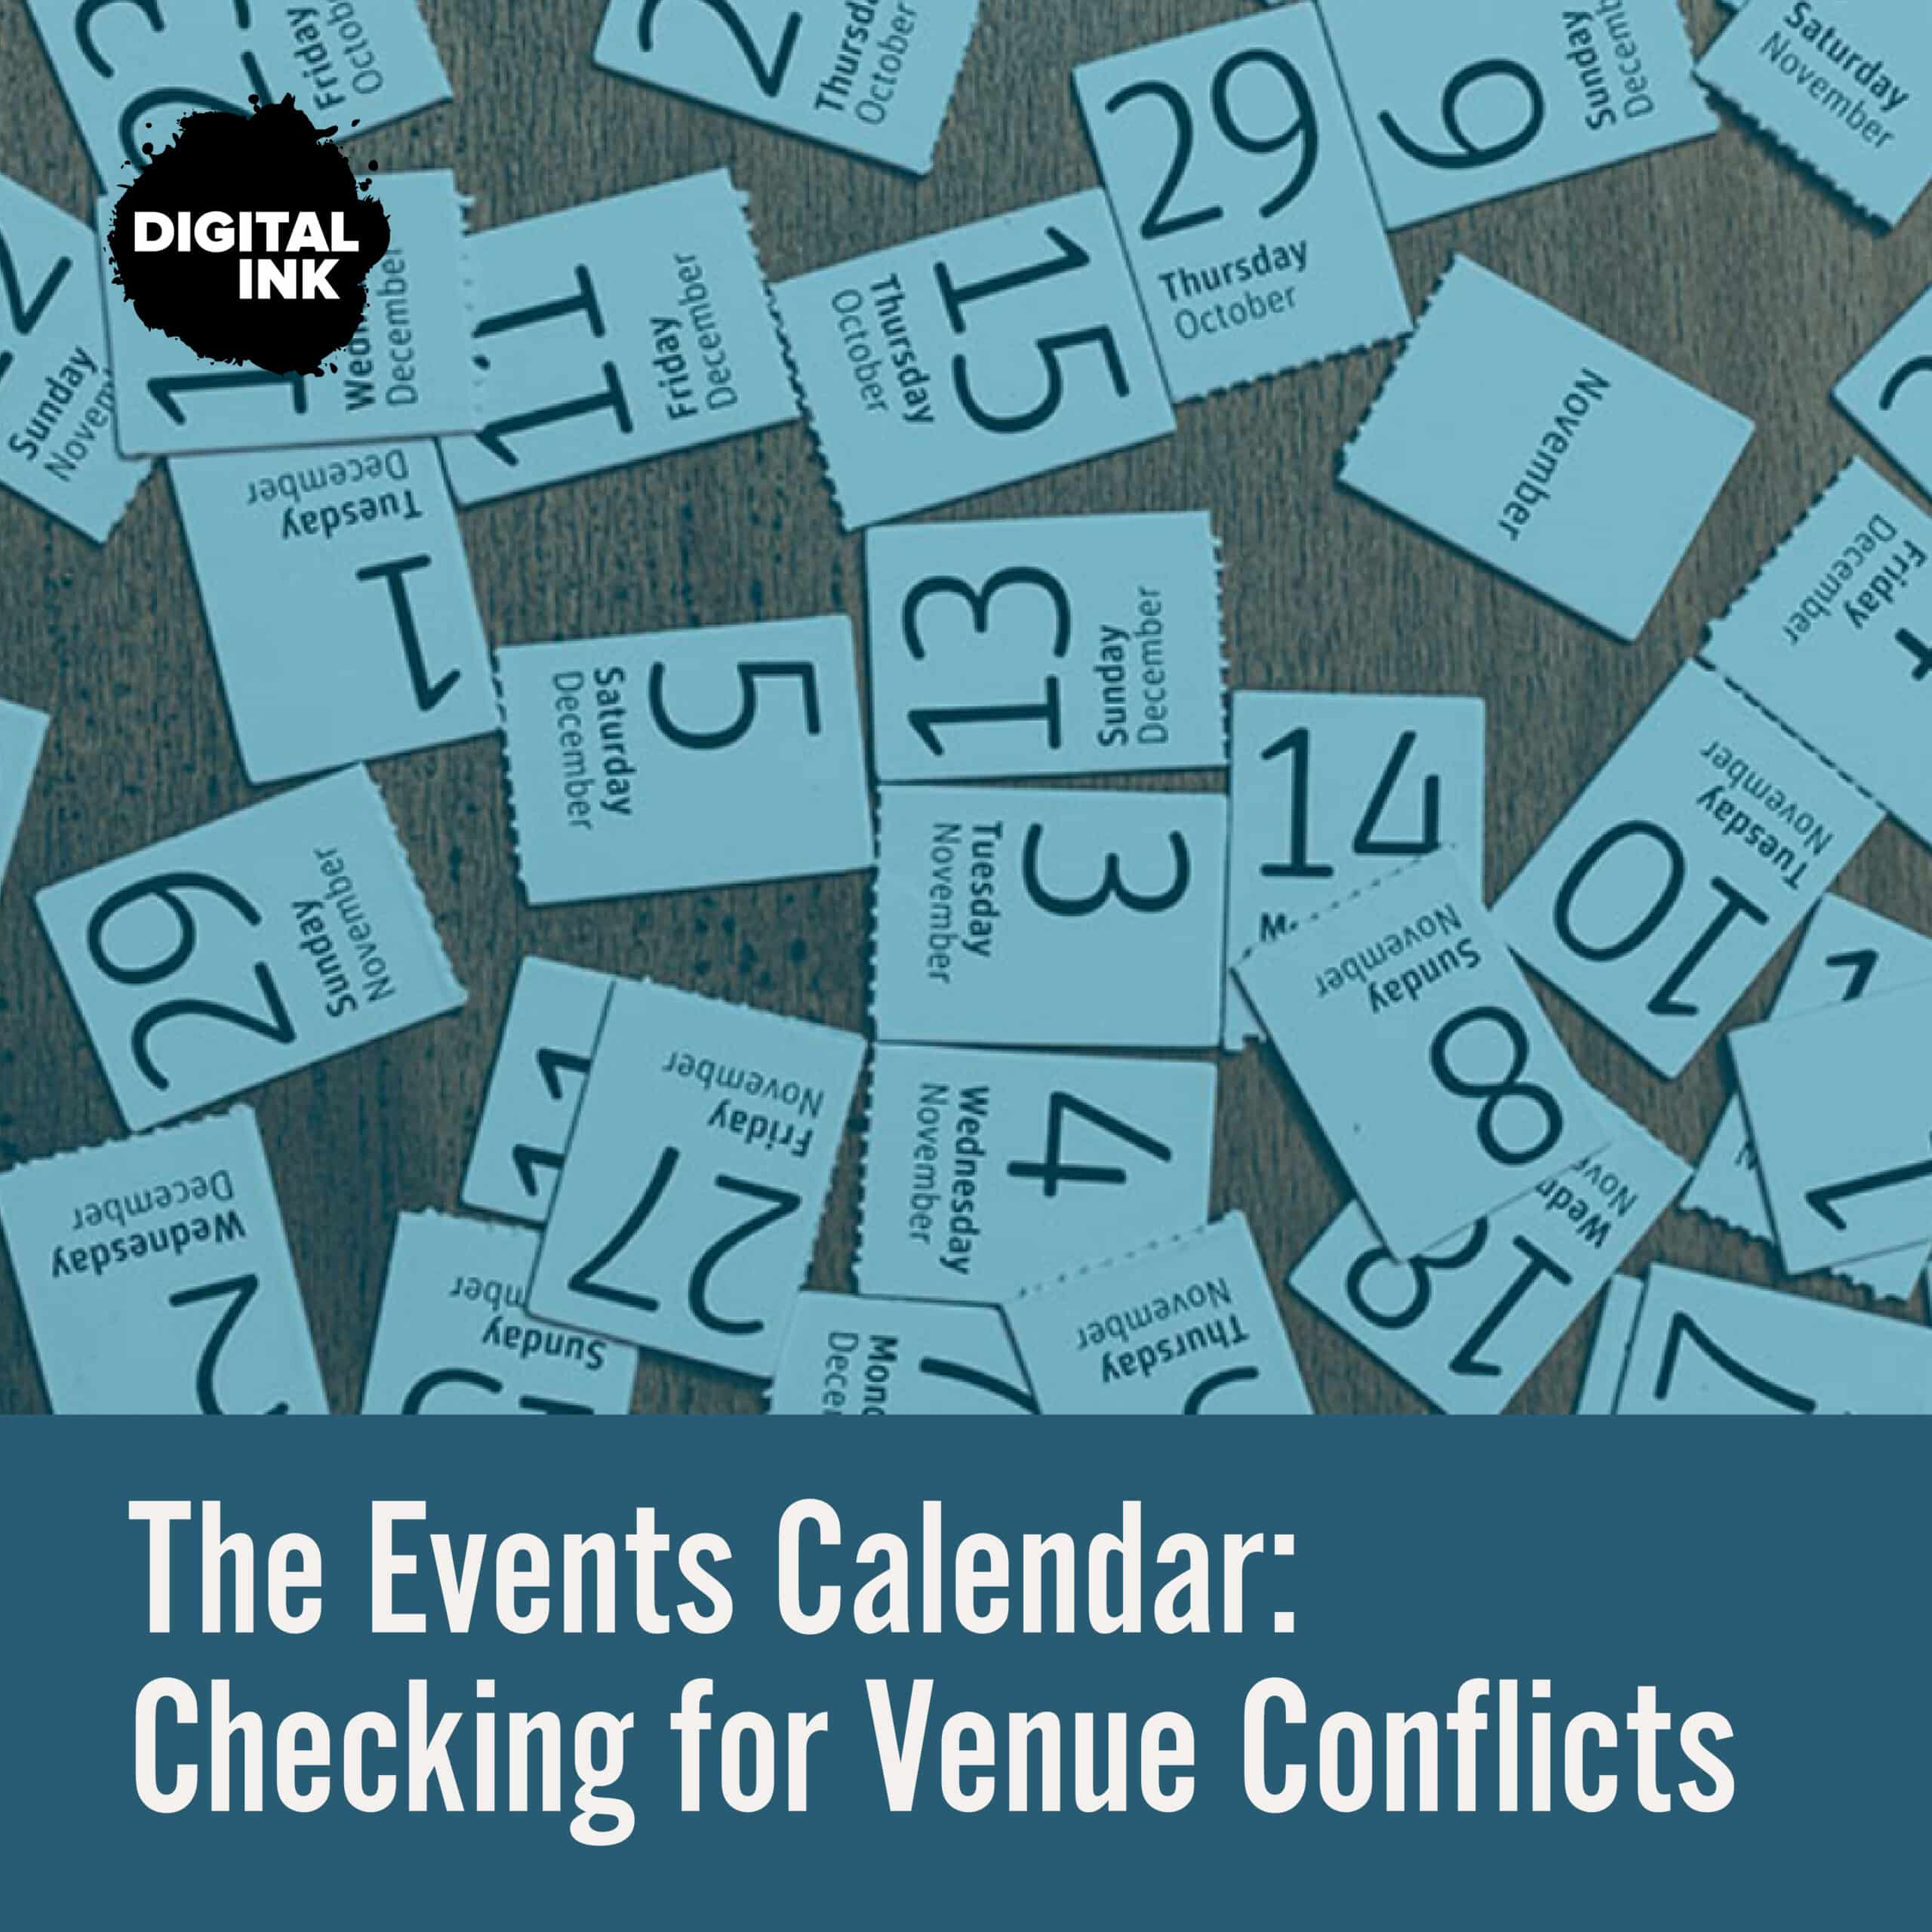 The Events Calendar: Checking for Venue Conflicts